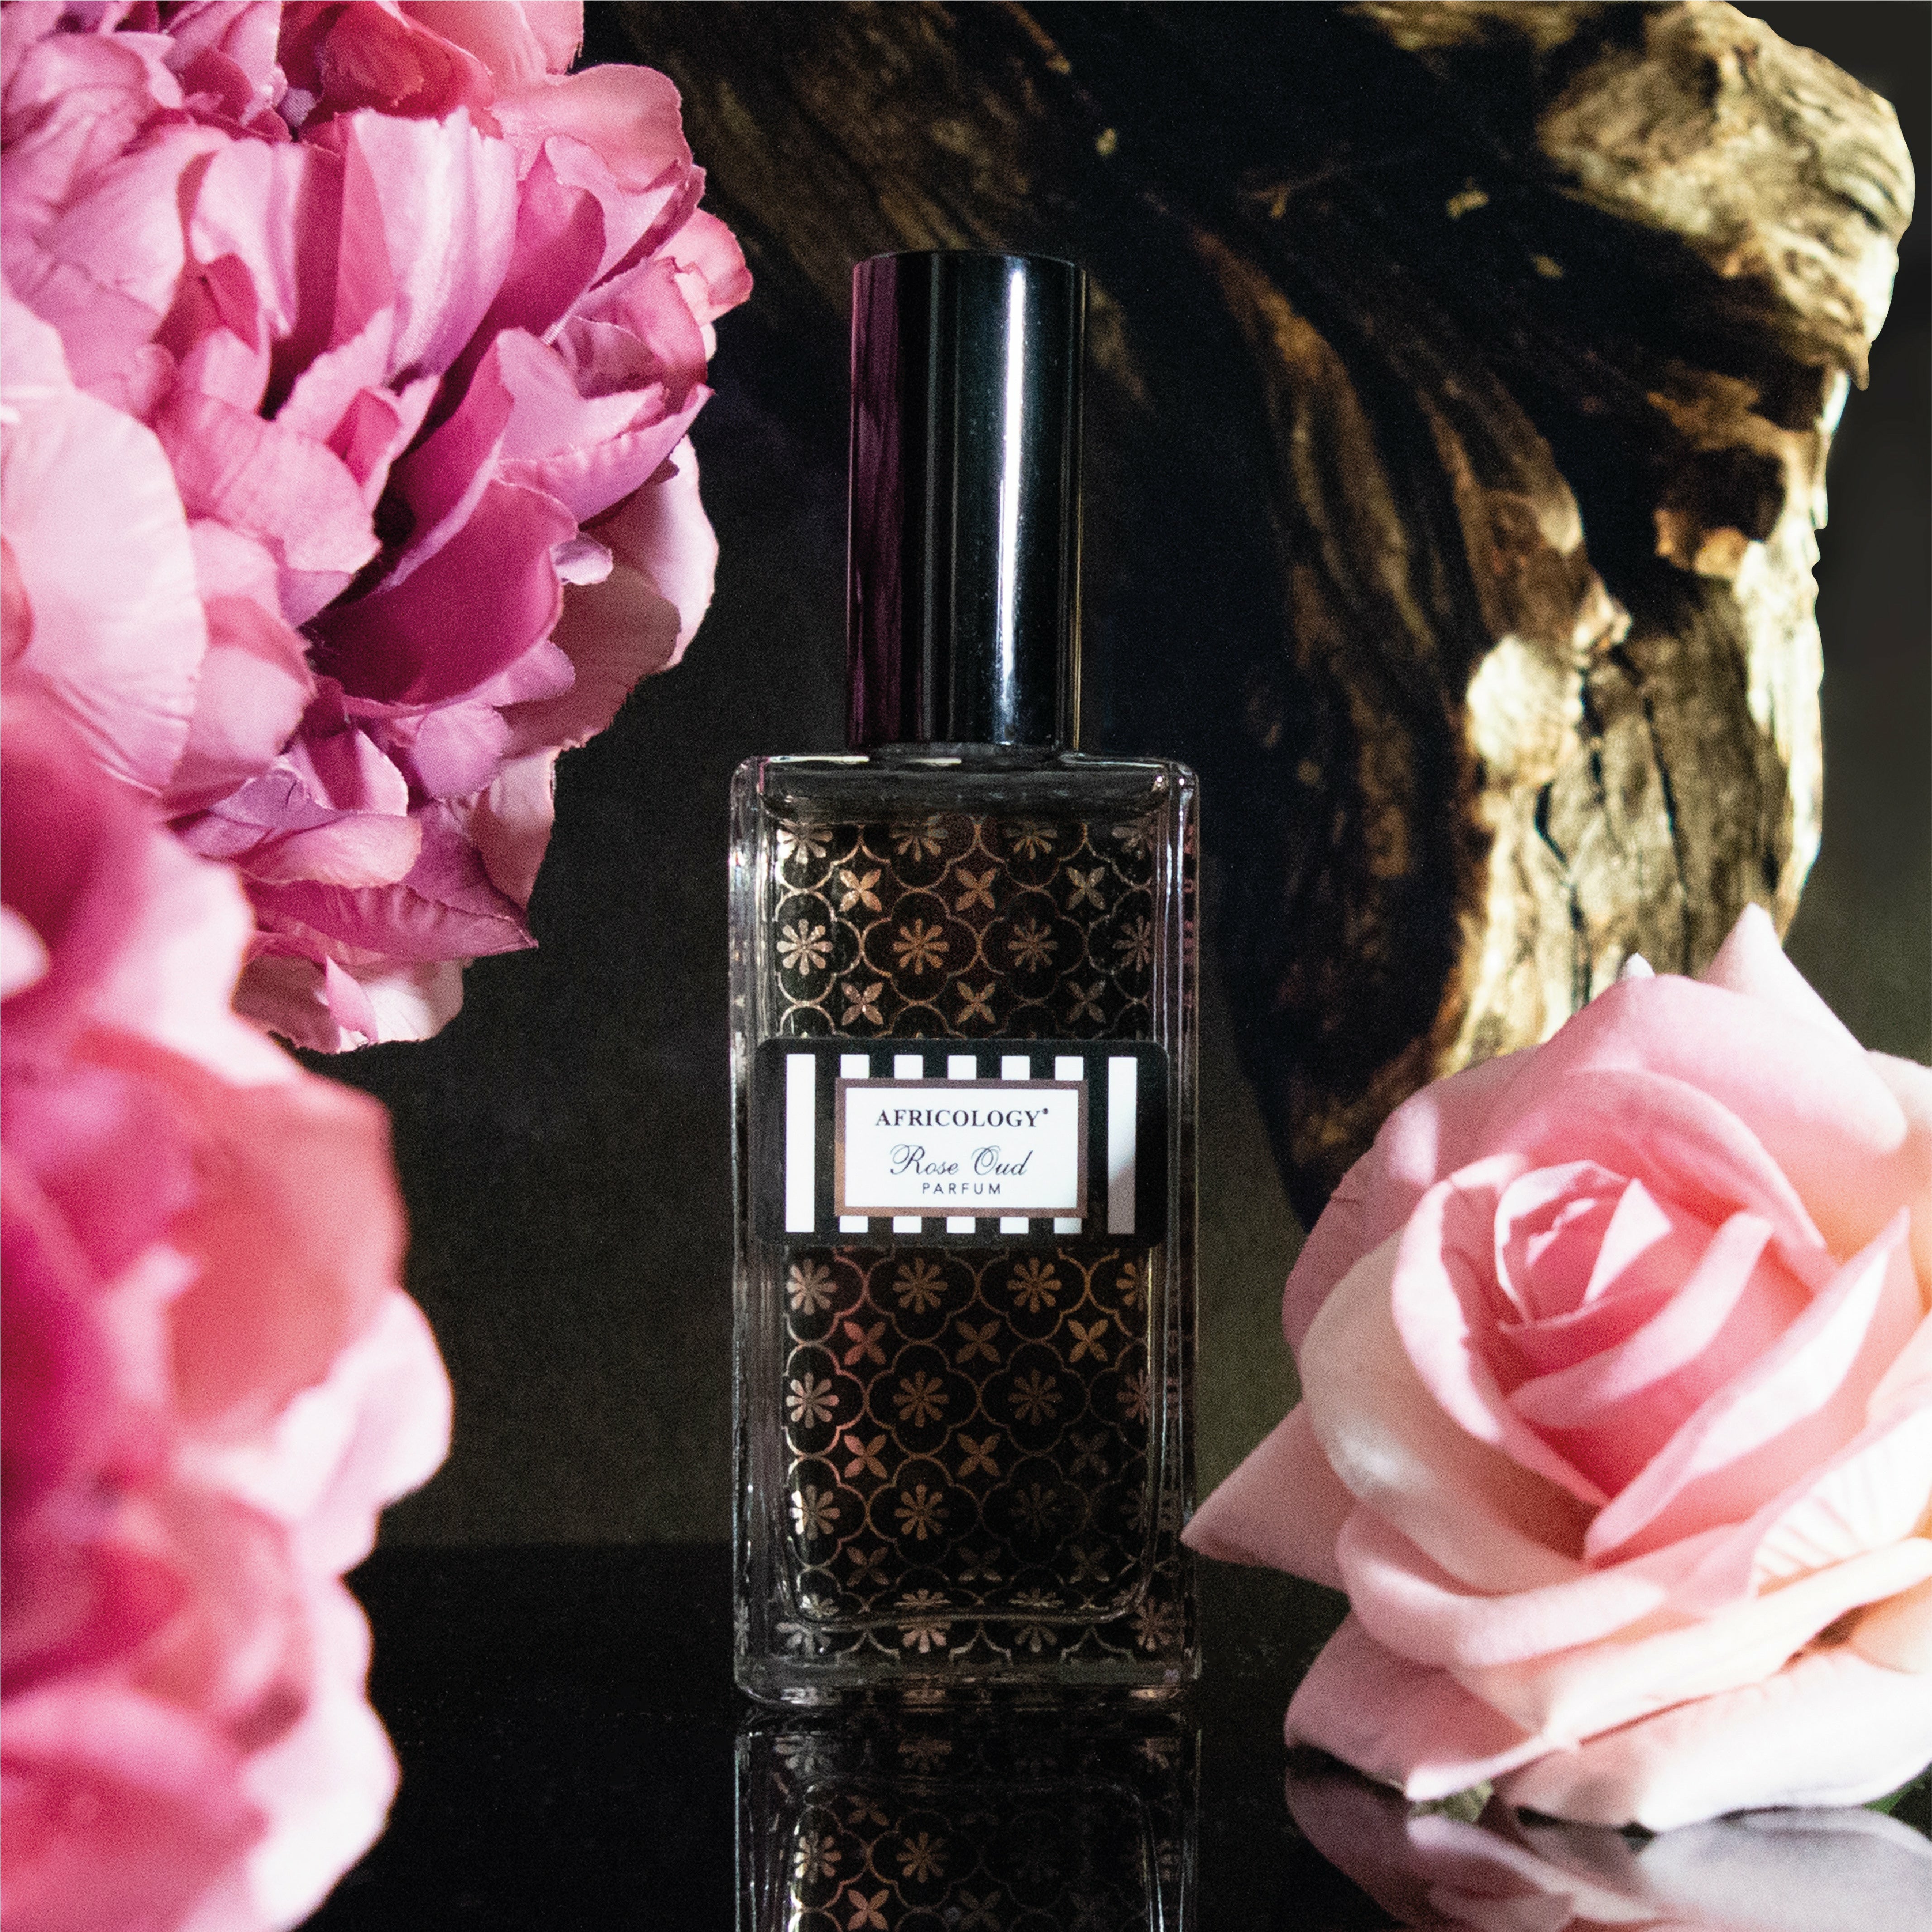 Rose Oud, a dark and powerful rose fragrance